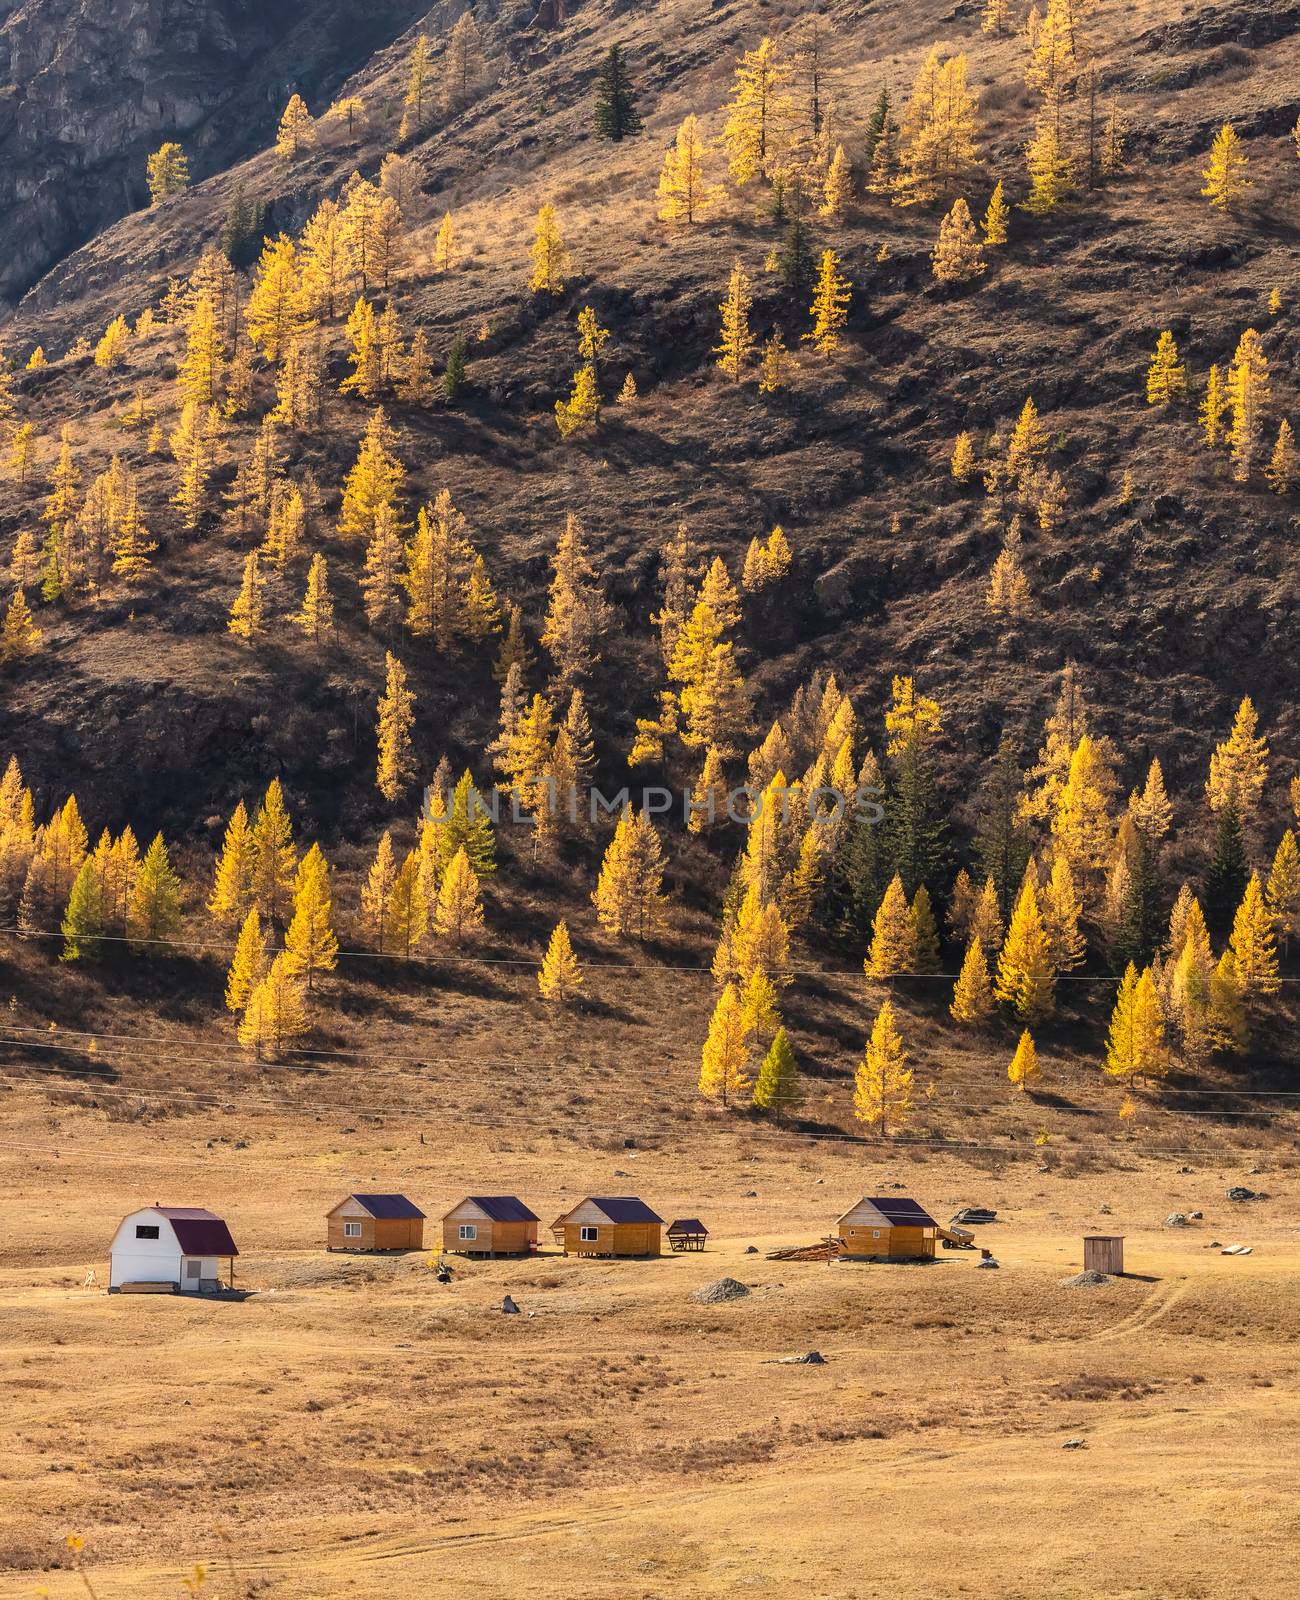 Altai mountains. Beautiful highland autumn panoramic landscape. Portrait size. Wooden huts in the foreground. Mountain slopes covered with golden trees in the background. Russia. Siberia.